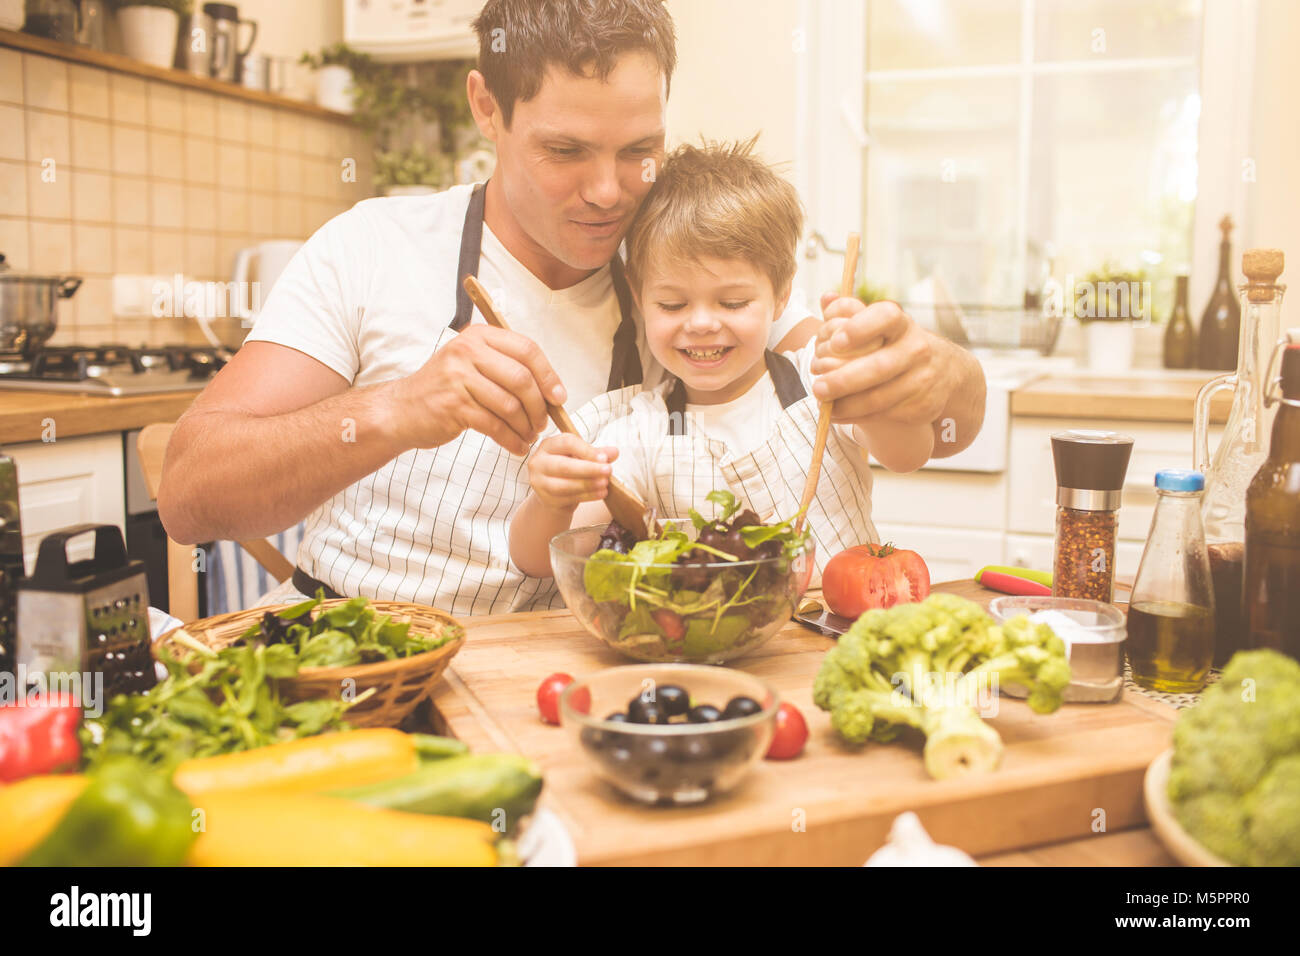 Father is cooking with his son Stock Photo